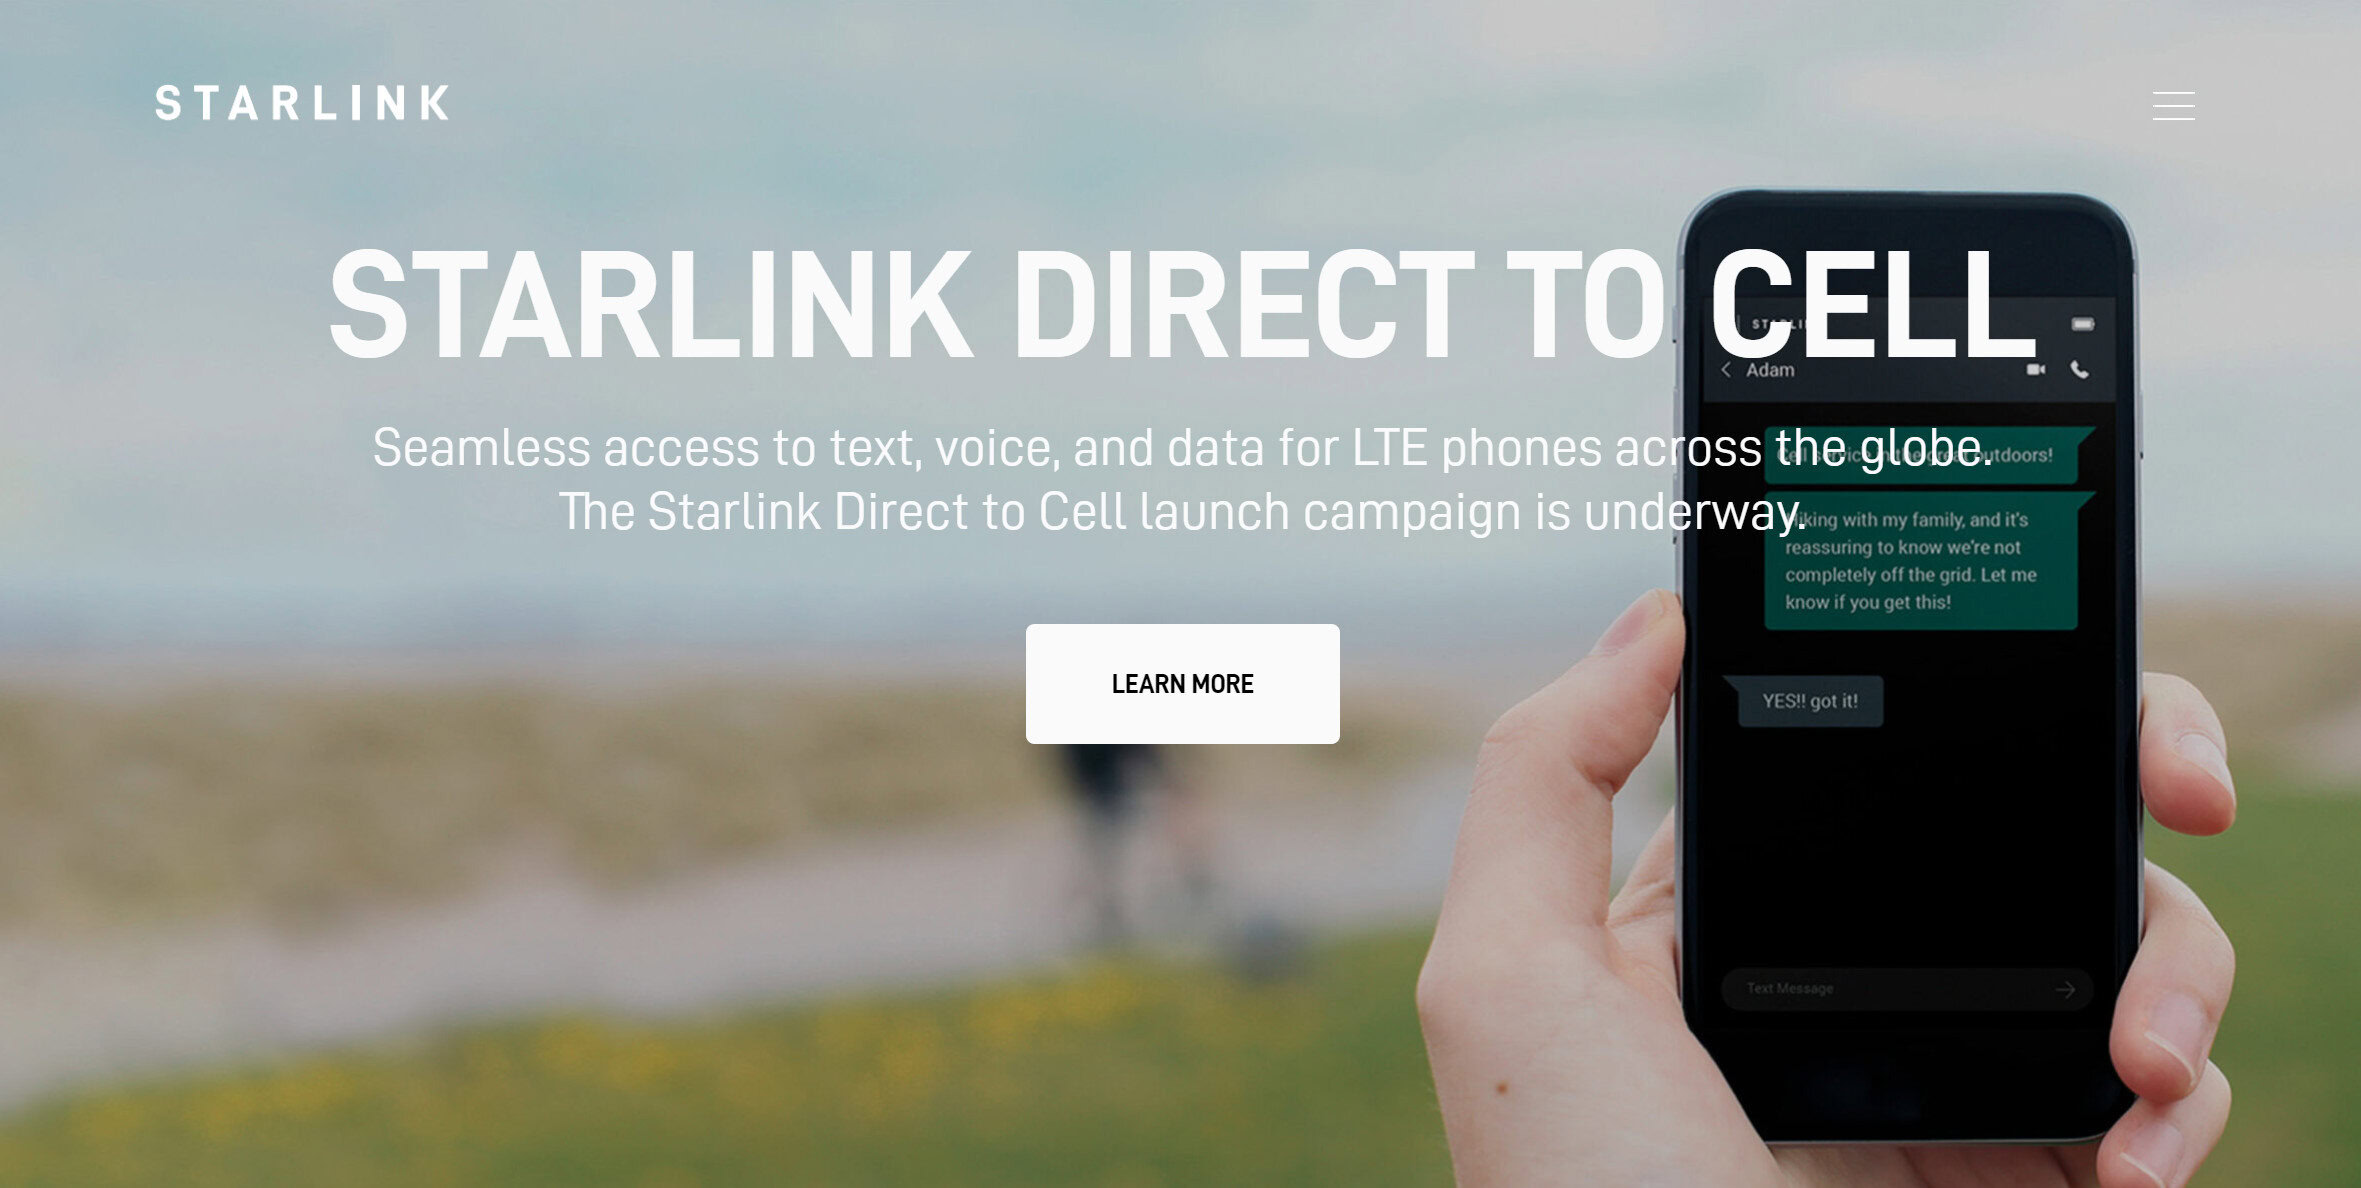 Starlink Direct to Cell 랜딩 페이지